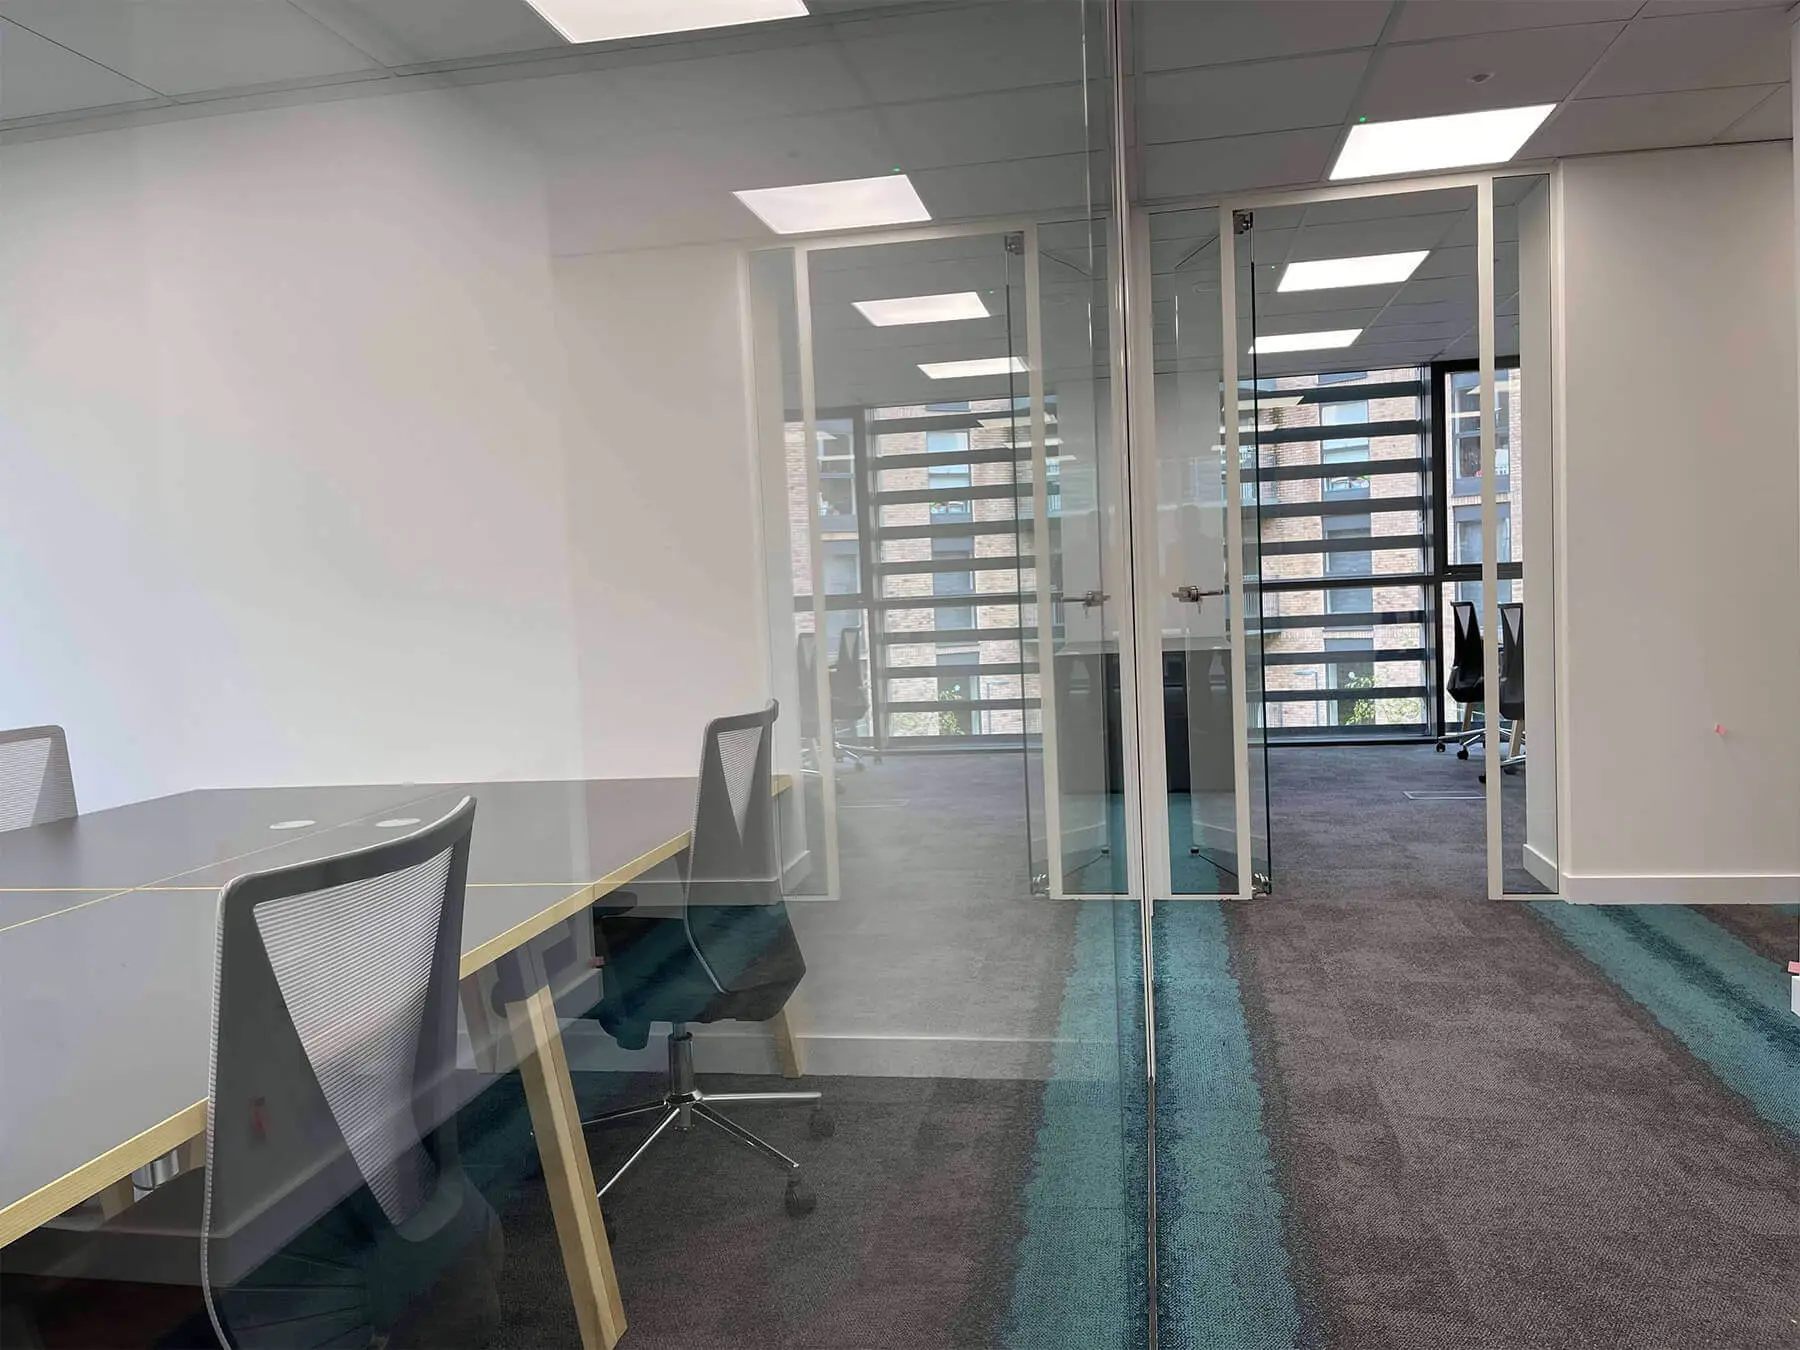 Meeting area with glass doors and walls